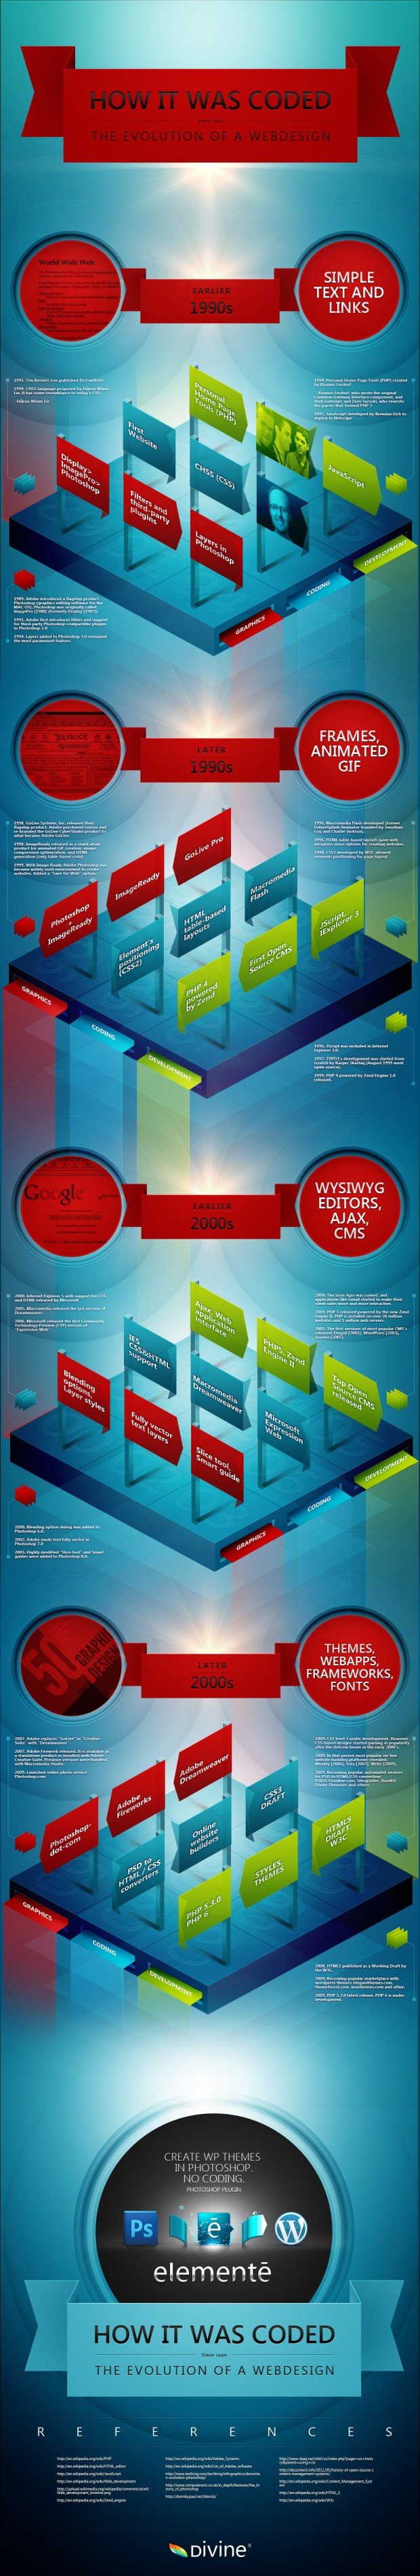 How it Was Coded: The Evolution of Web Design [Infographic]